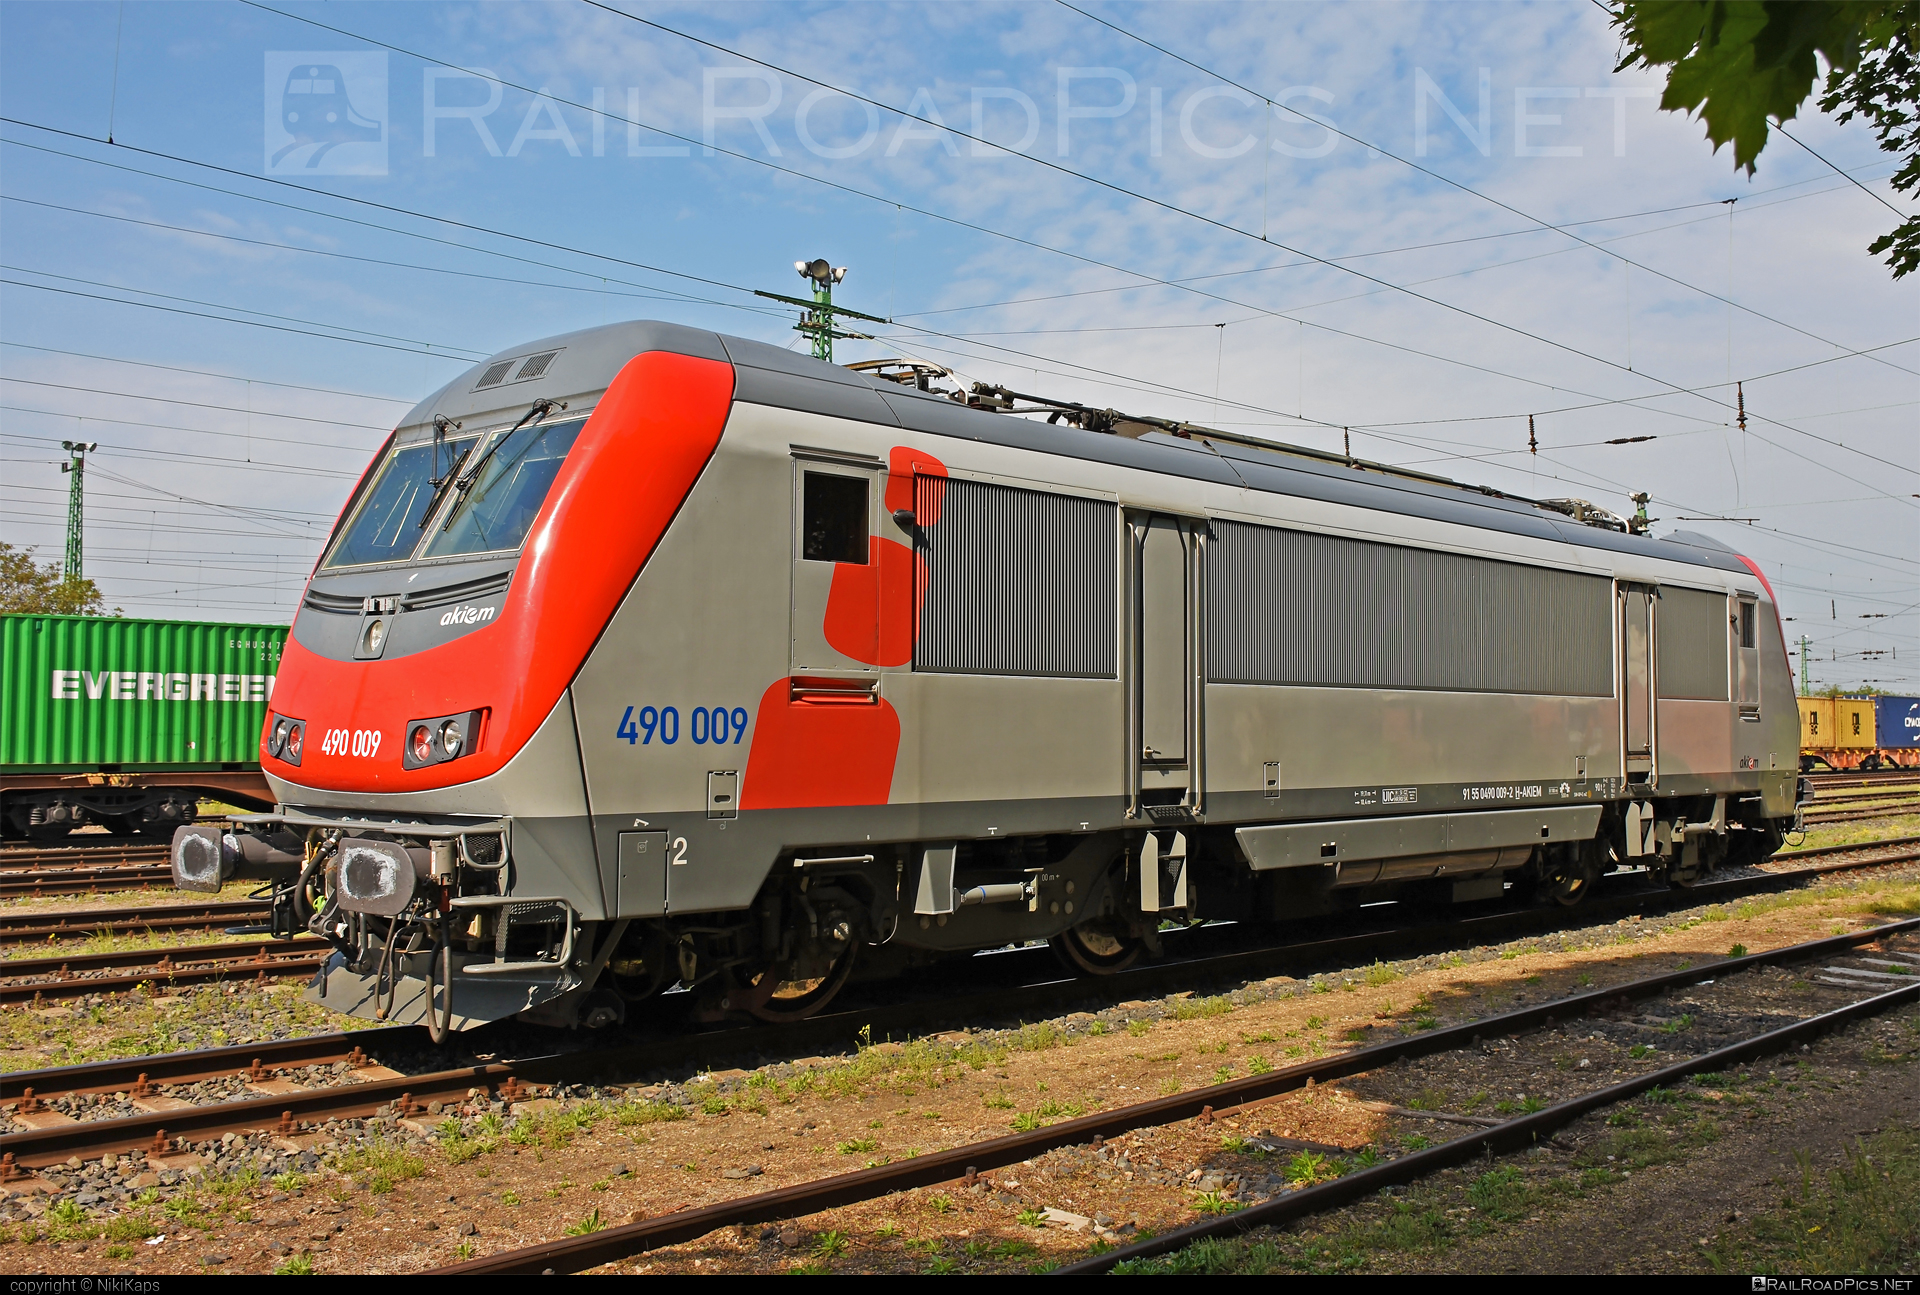 GEC Alsthom SNCF Class BB 36000 `Astride` - 490 009 operated by Akiem SAS #akiem #akiemsas #alstom #alstomAstride #alstomBB36000 #bb36000 #bb36000astride #gecAlsthomAstride #gecAlsthomBB36000 #gecalsthom